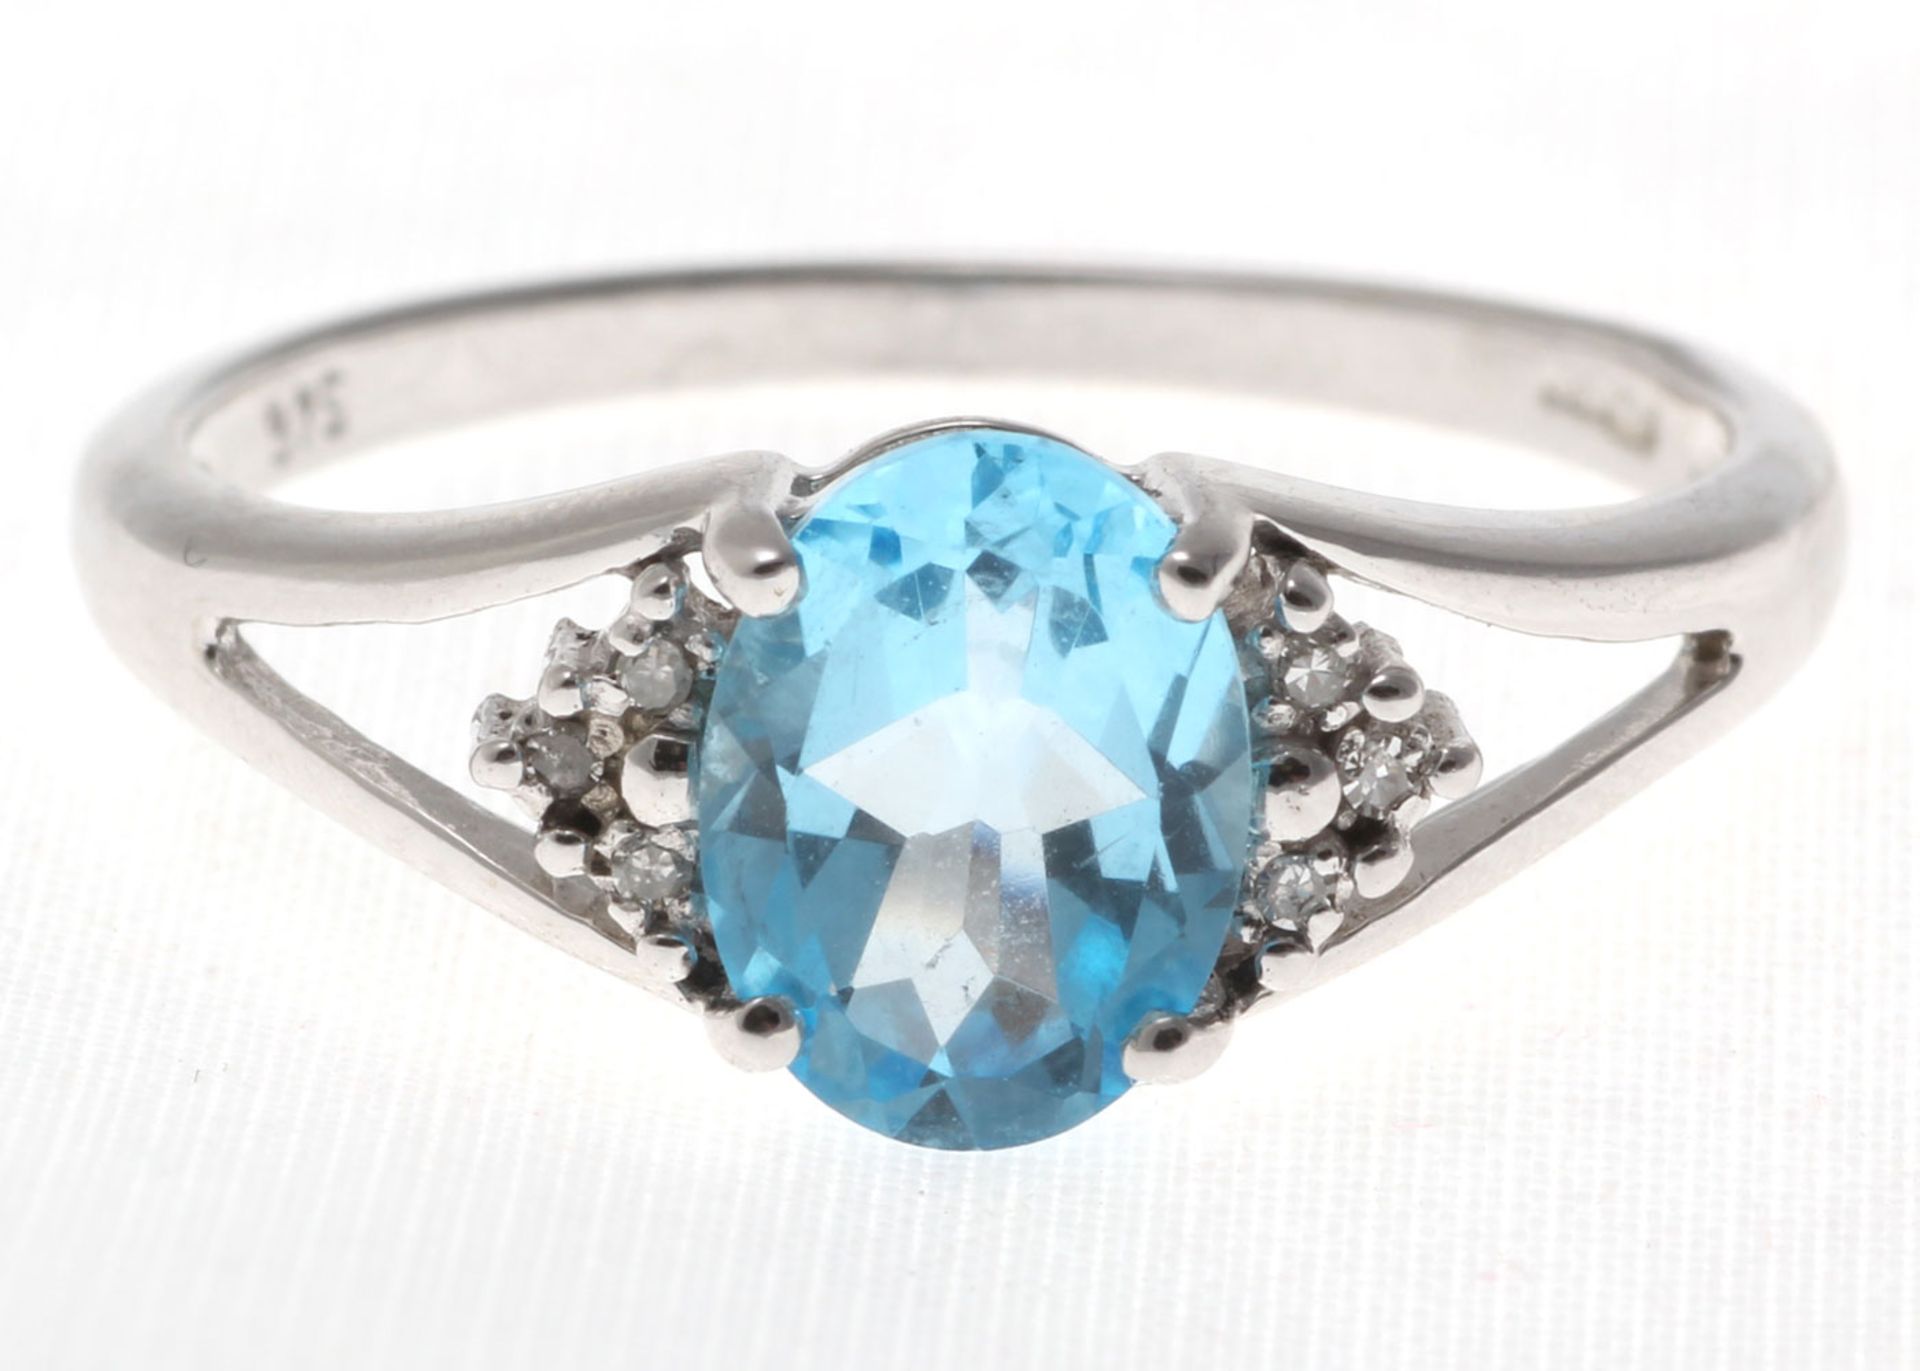 9ct White Gold Diamond And Blue Topaz Ring 0.02 - Image 5 of 6